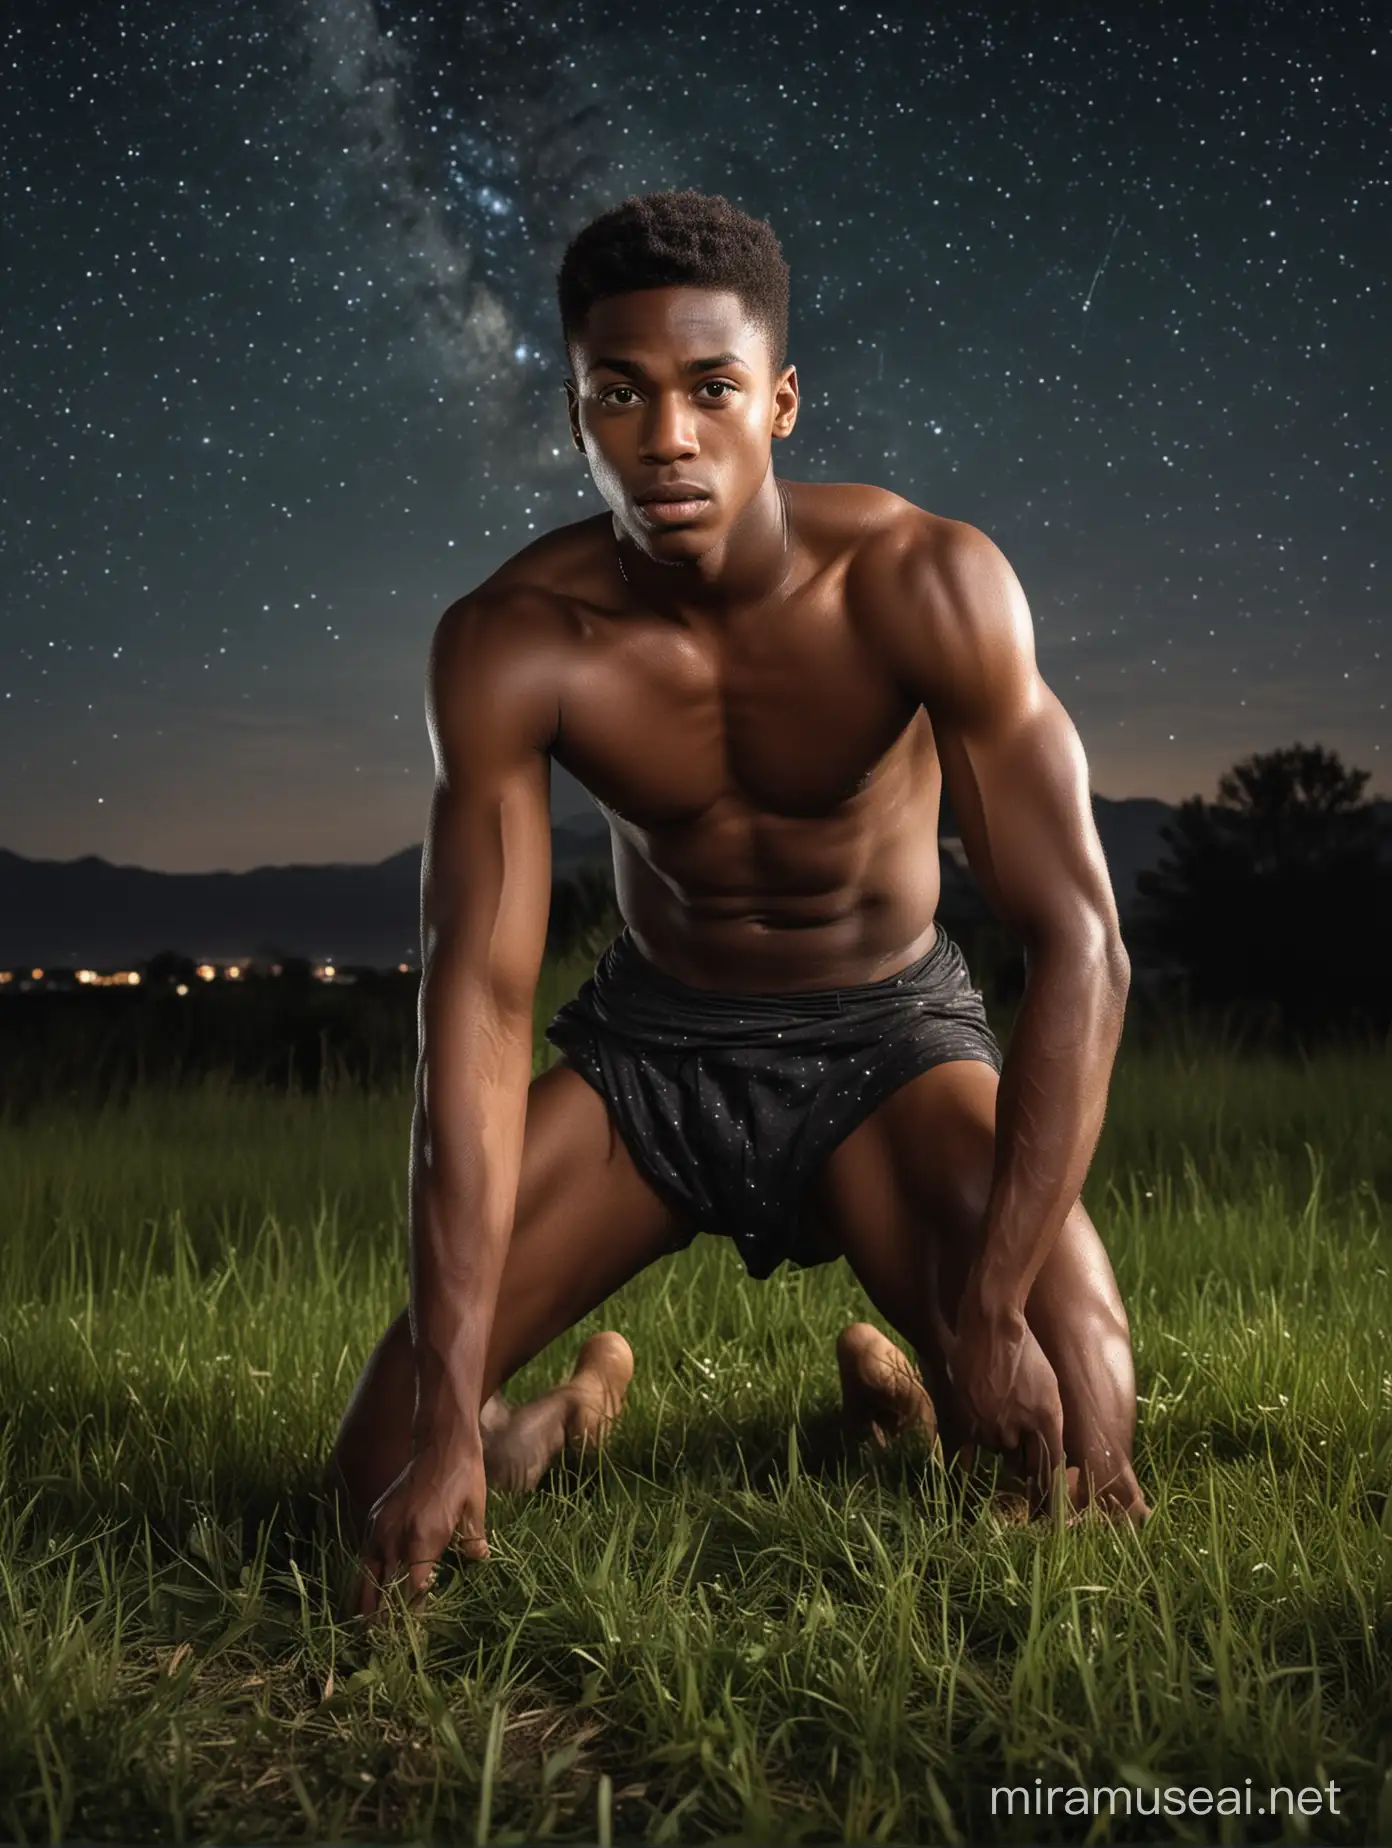 Young sexy muscular all sweaty black boy in loincloth, crouching in grass, at night, under a sky full of stars.